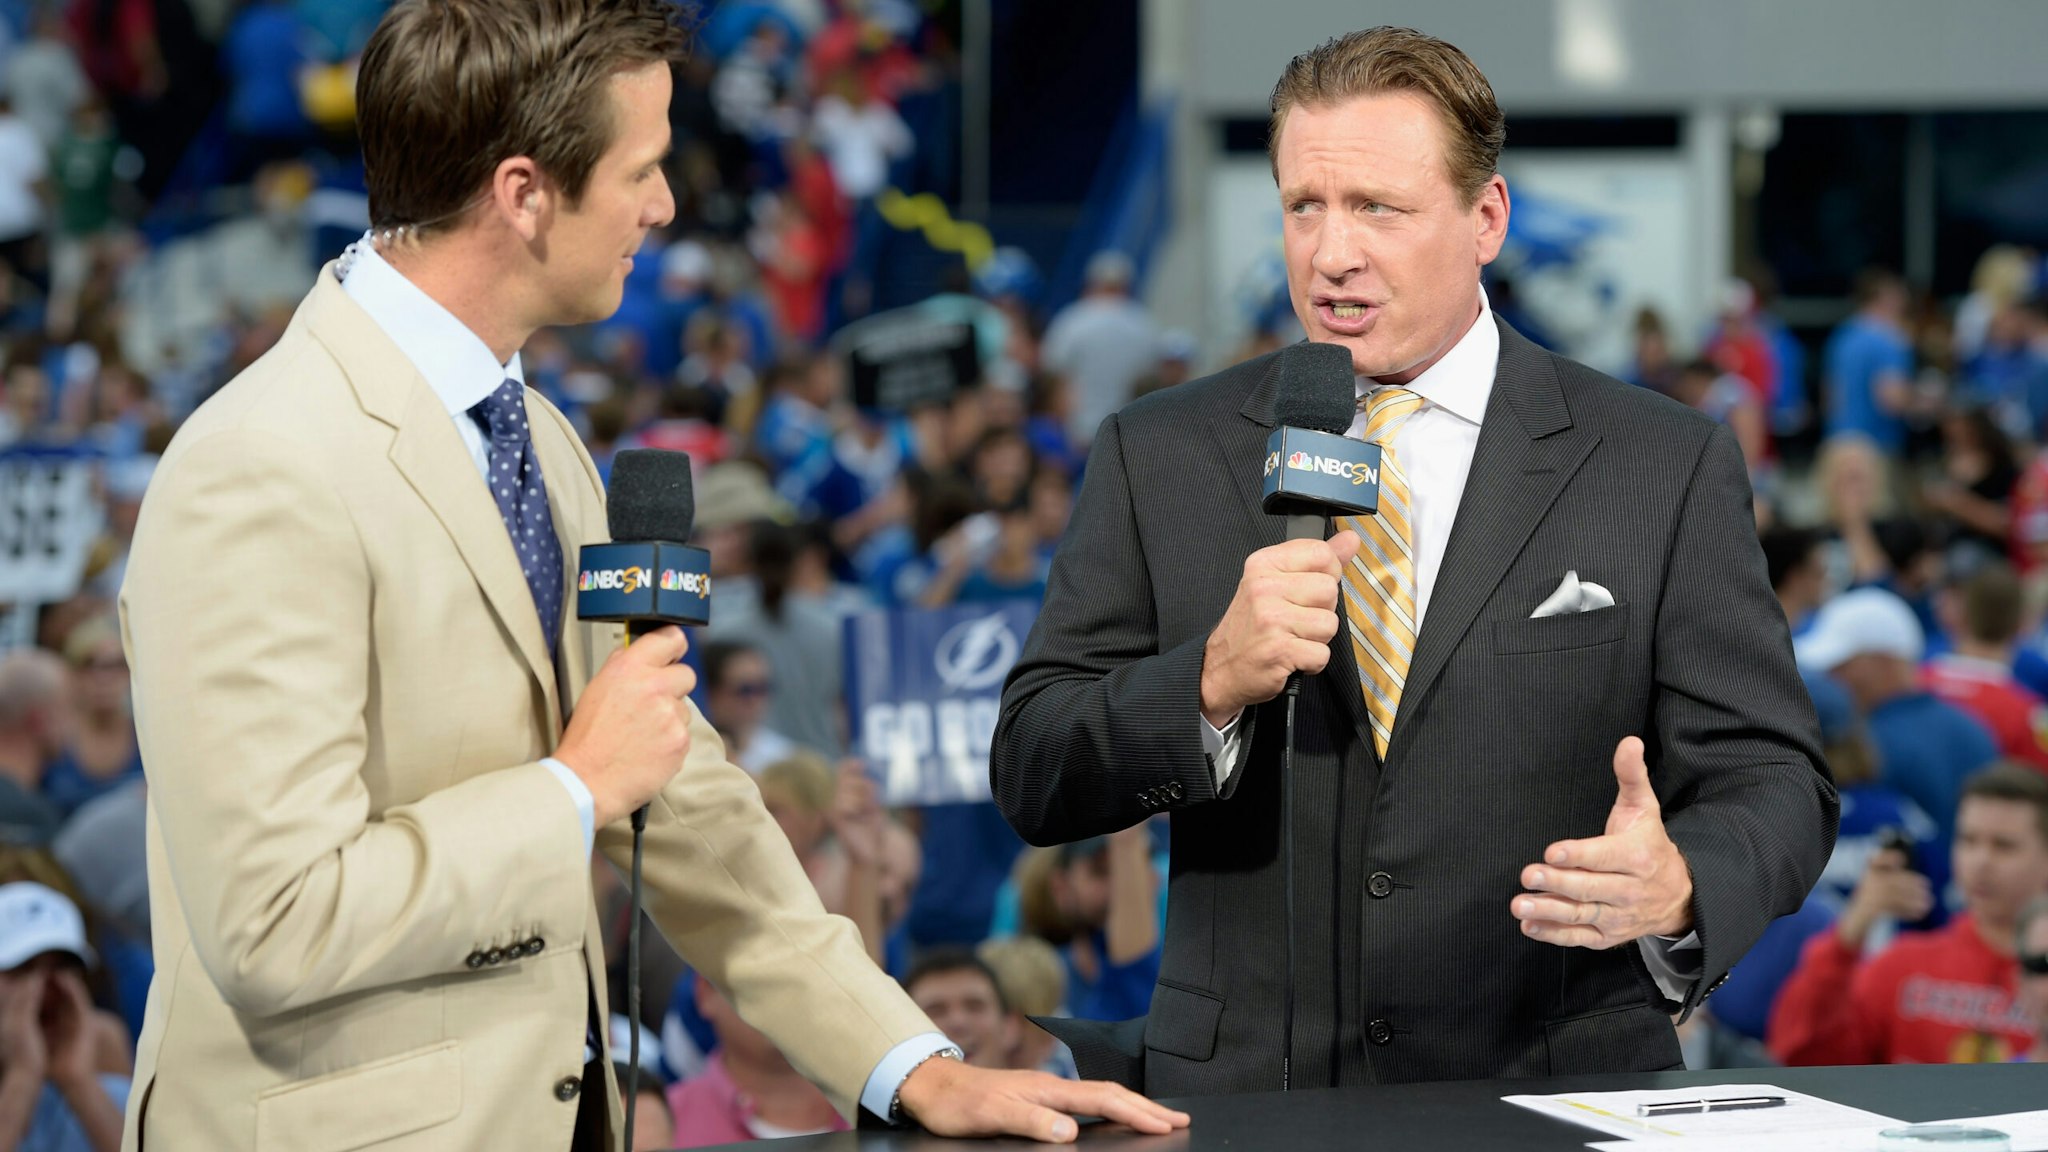 TAMPA, FL - JUNE 03: NHL on NBC on-air talent Dave Briggs and Jeremy Roenick discuss Game One of the 2015 NHL Stanley Cup Final between the Tampa Bay Lightning and the Chicago Blackhawks at Amalie Arena on June 3, 2015 in Tampa, Florida. (Photo by Bill Smith/NHLI via Getty Images)